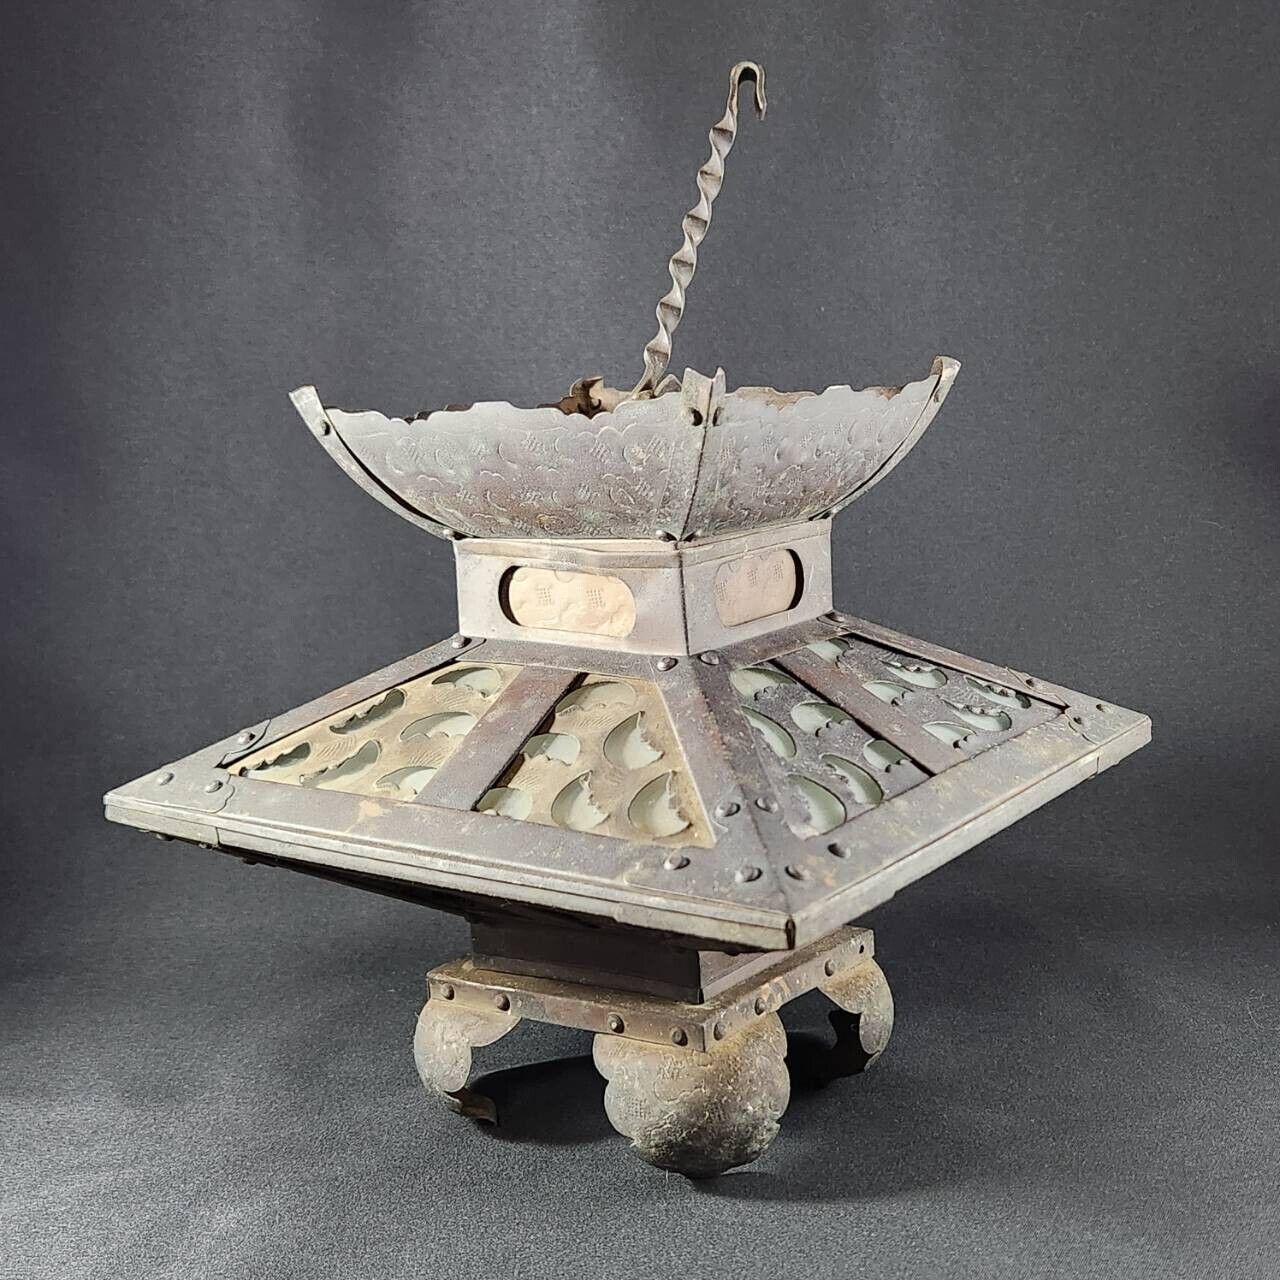 Vintage Japanese Hanging Buddhist Lantern Candle stand from temple H:19㎝/7.4in